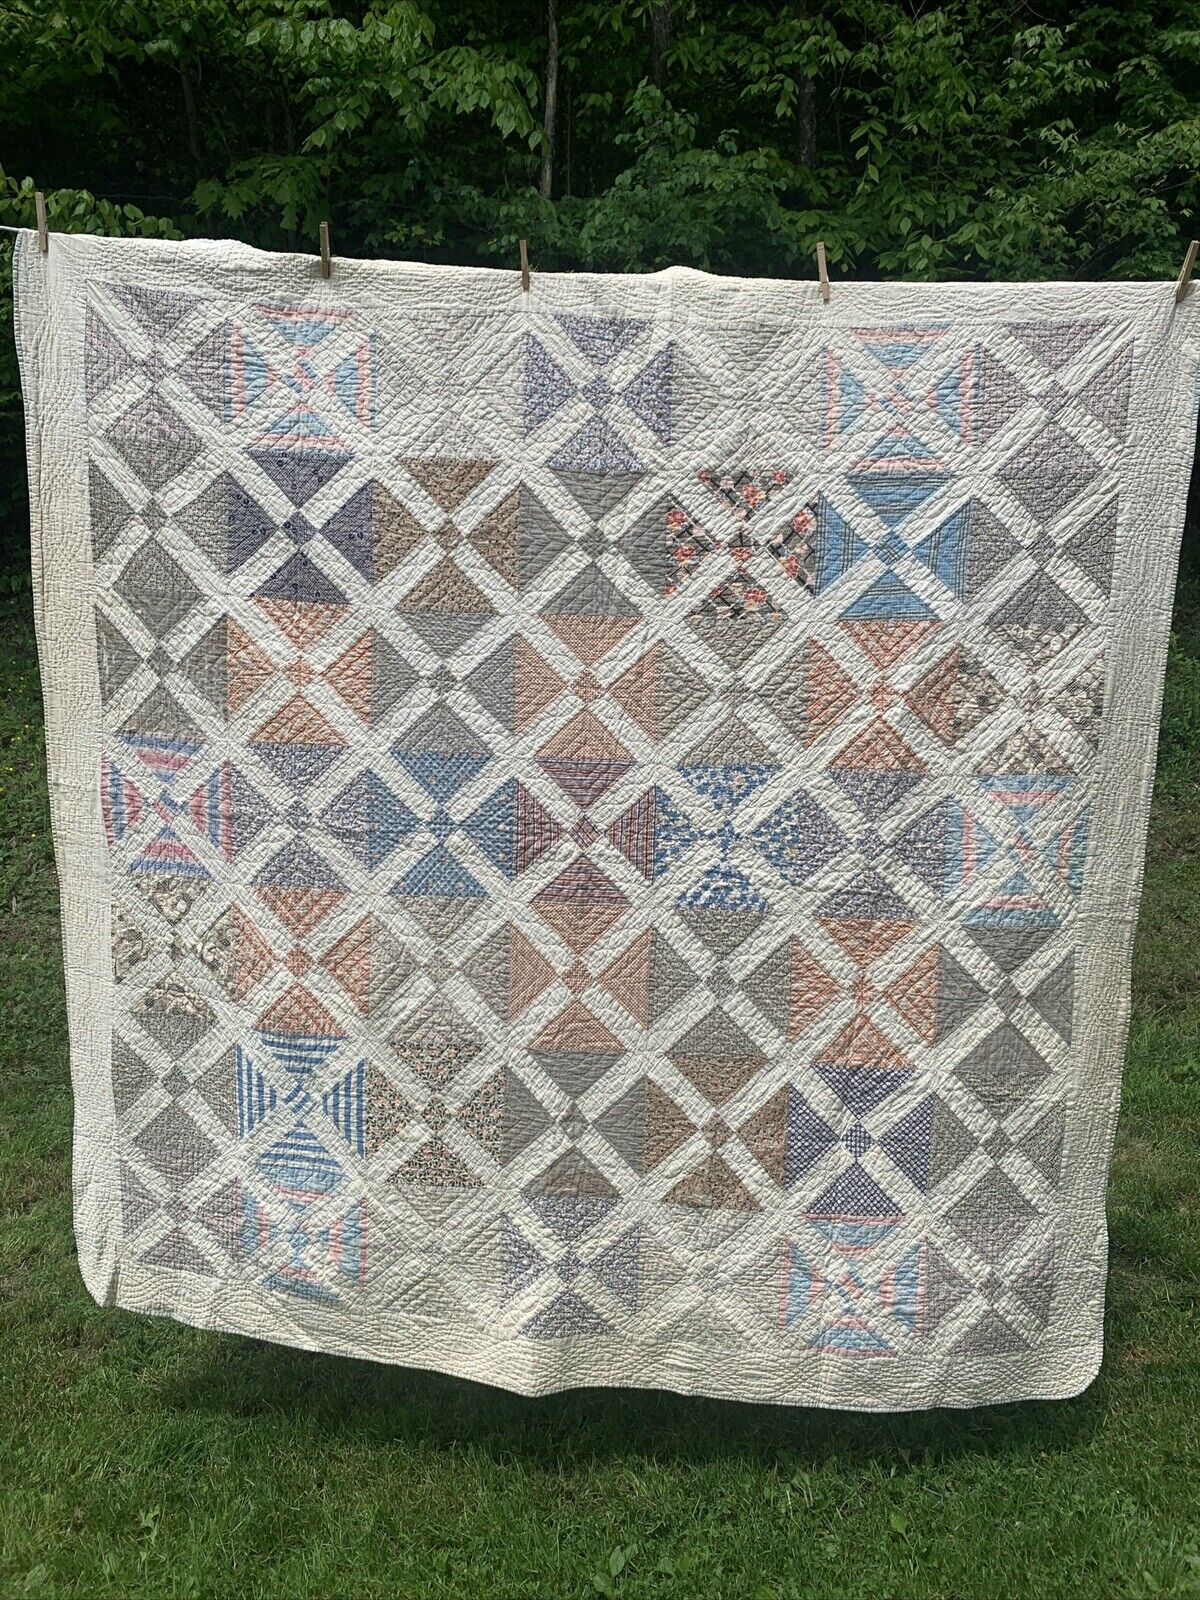 Vintage 1920s to 1940s X Block Hand stitched Hand quilted Quilt